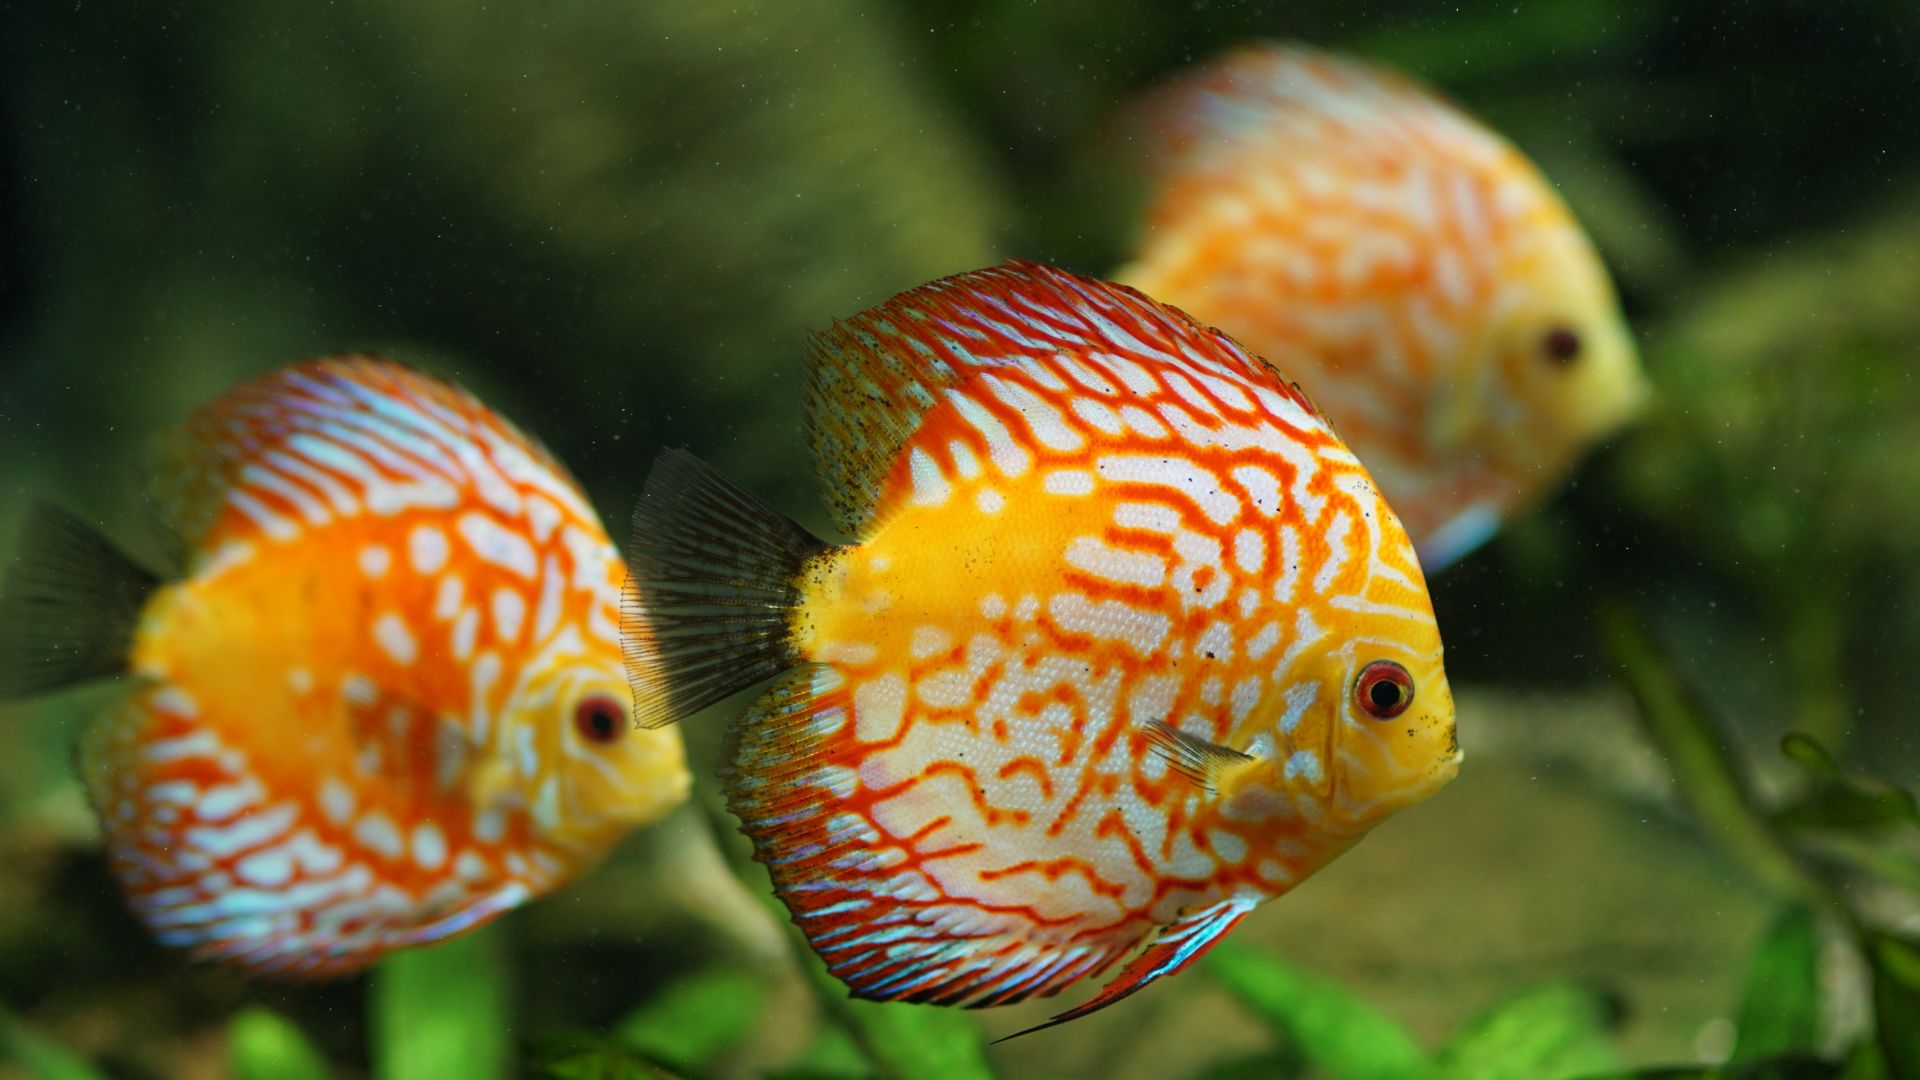 Are You Looking To Choose The Best Aquarium For Your Fish?